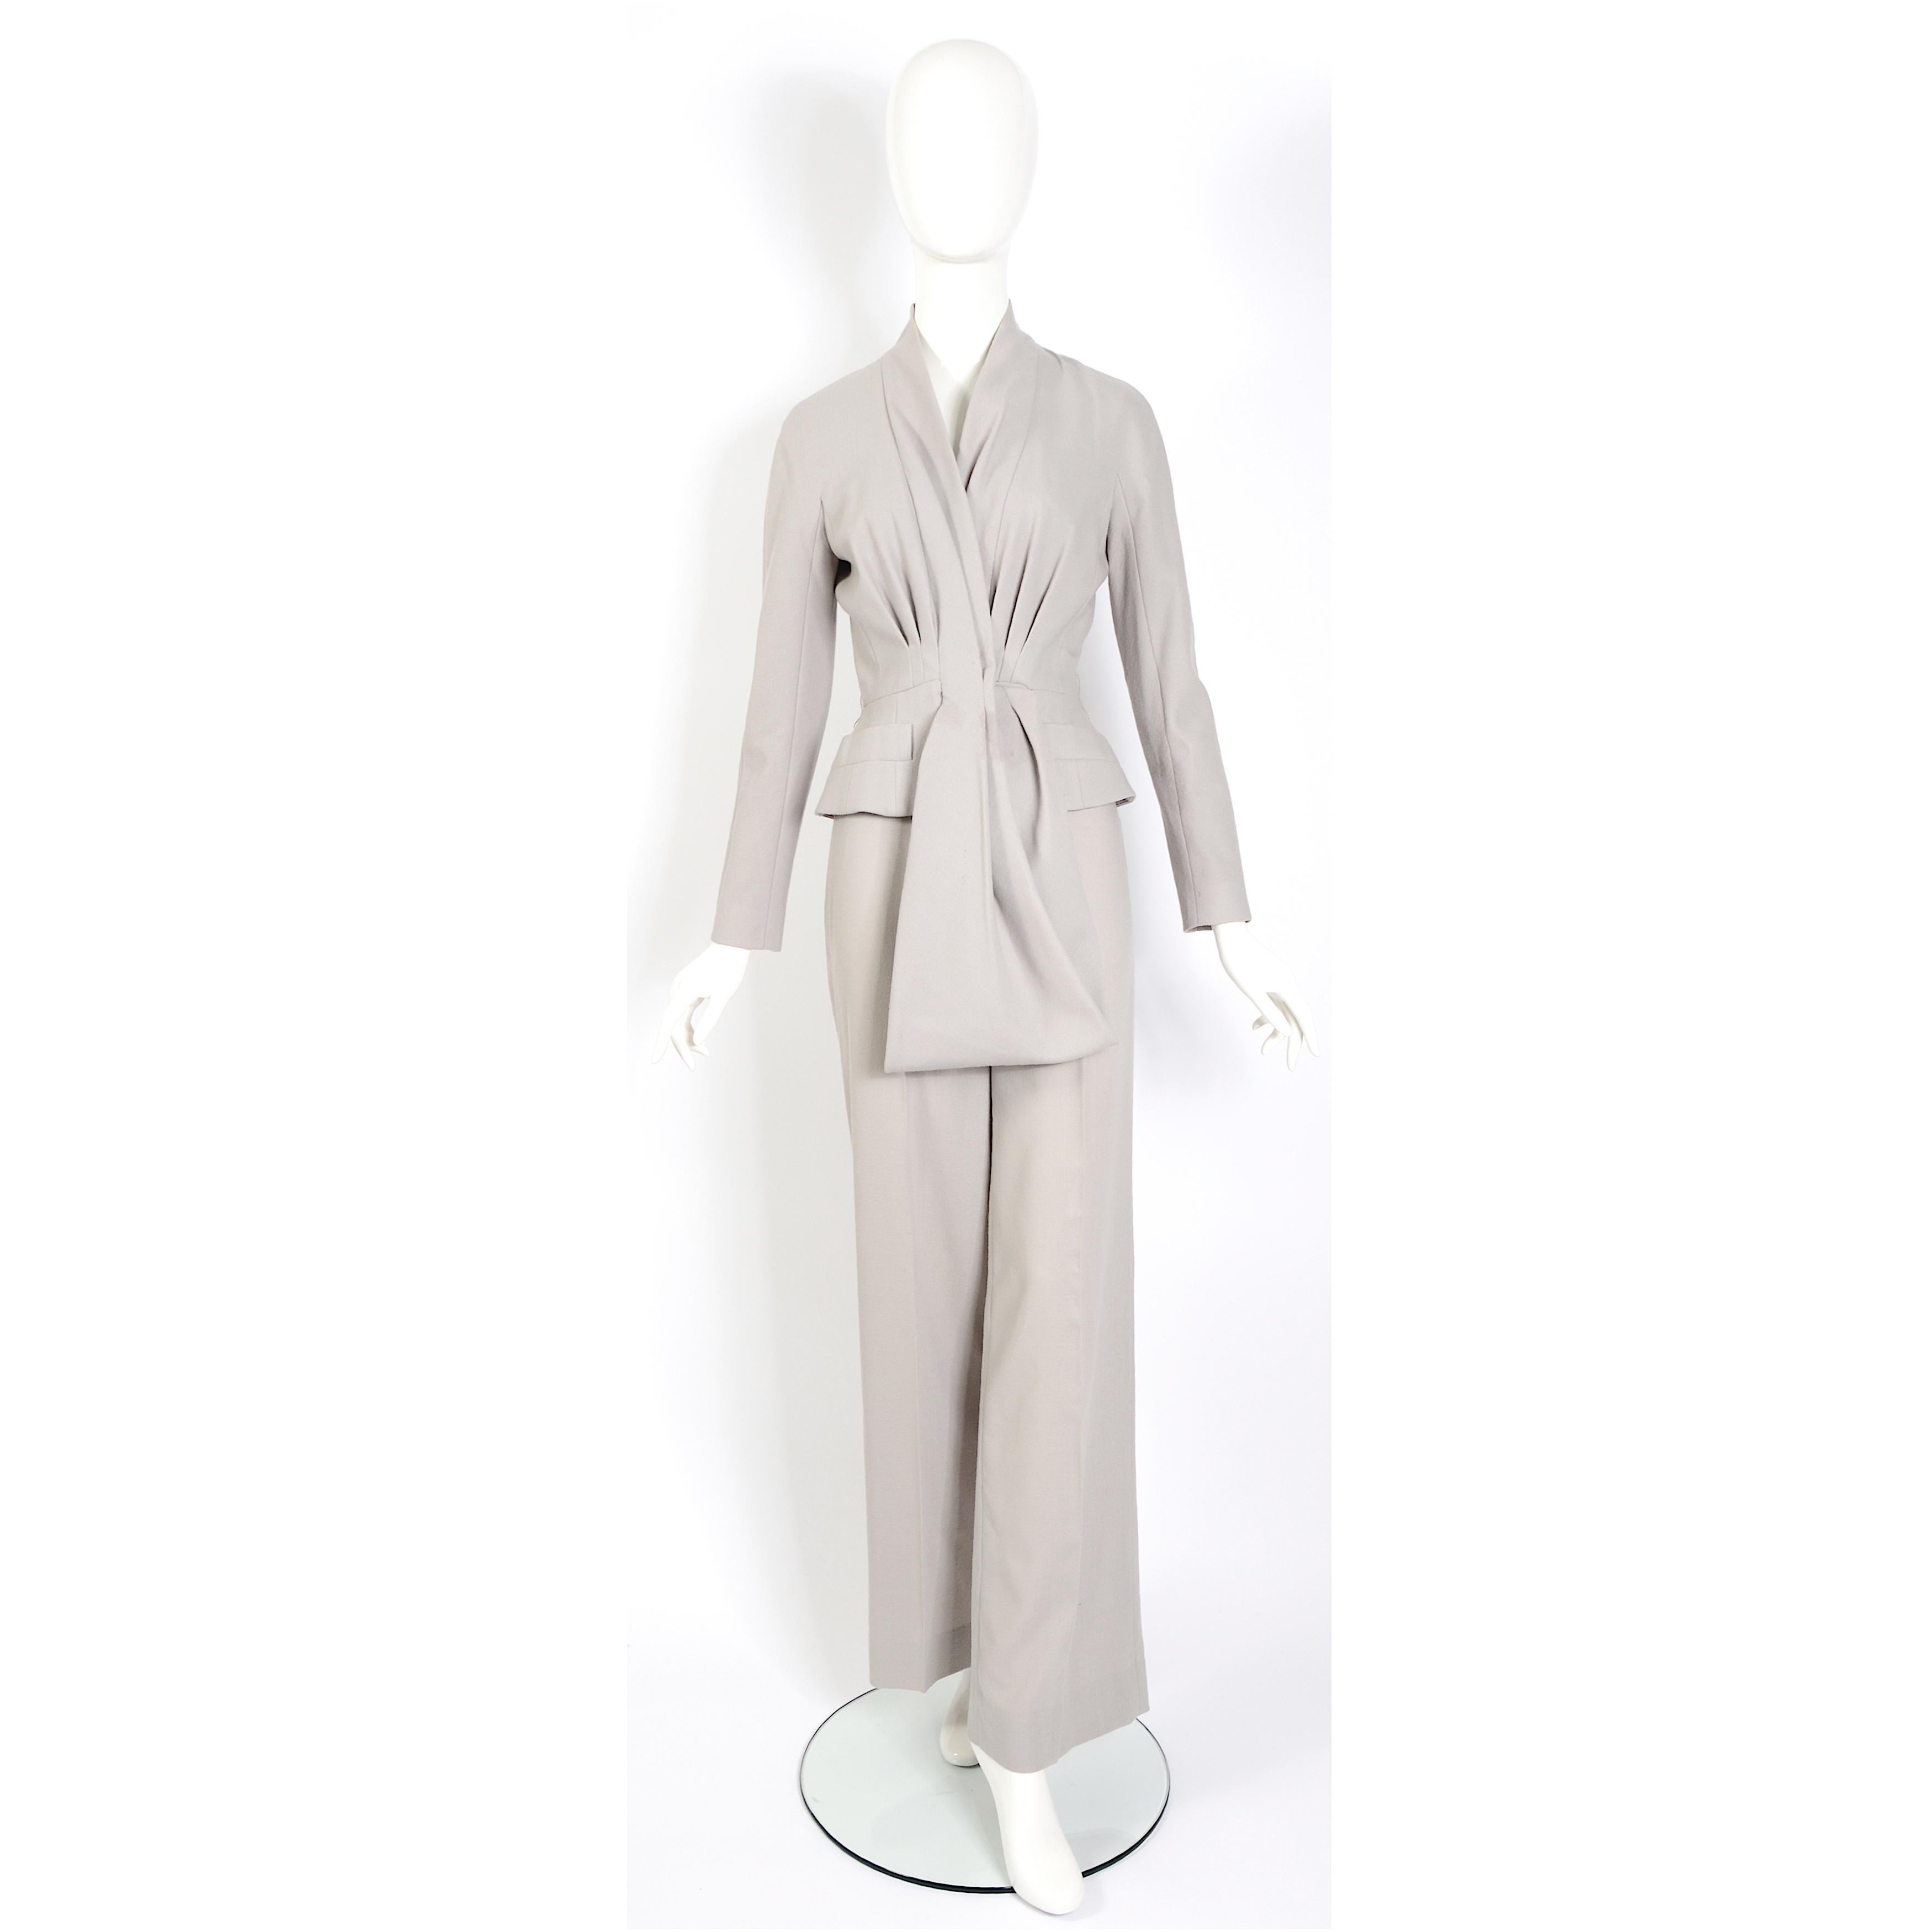 Christian Dior by John Galliano vintage 2008 ready to wear suit For Sale 4